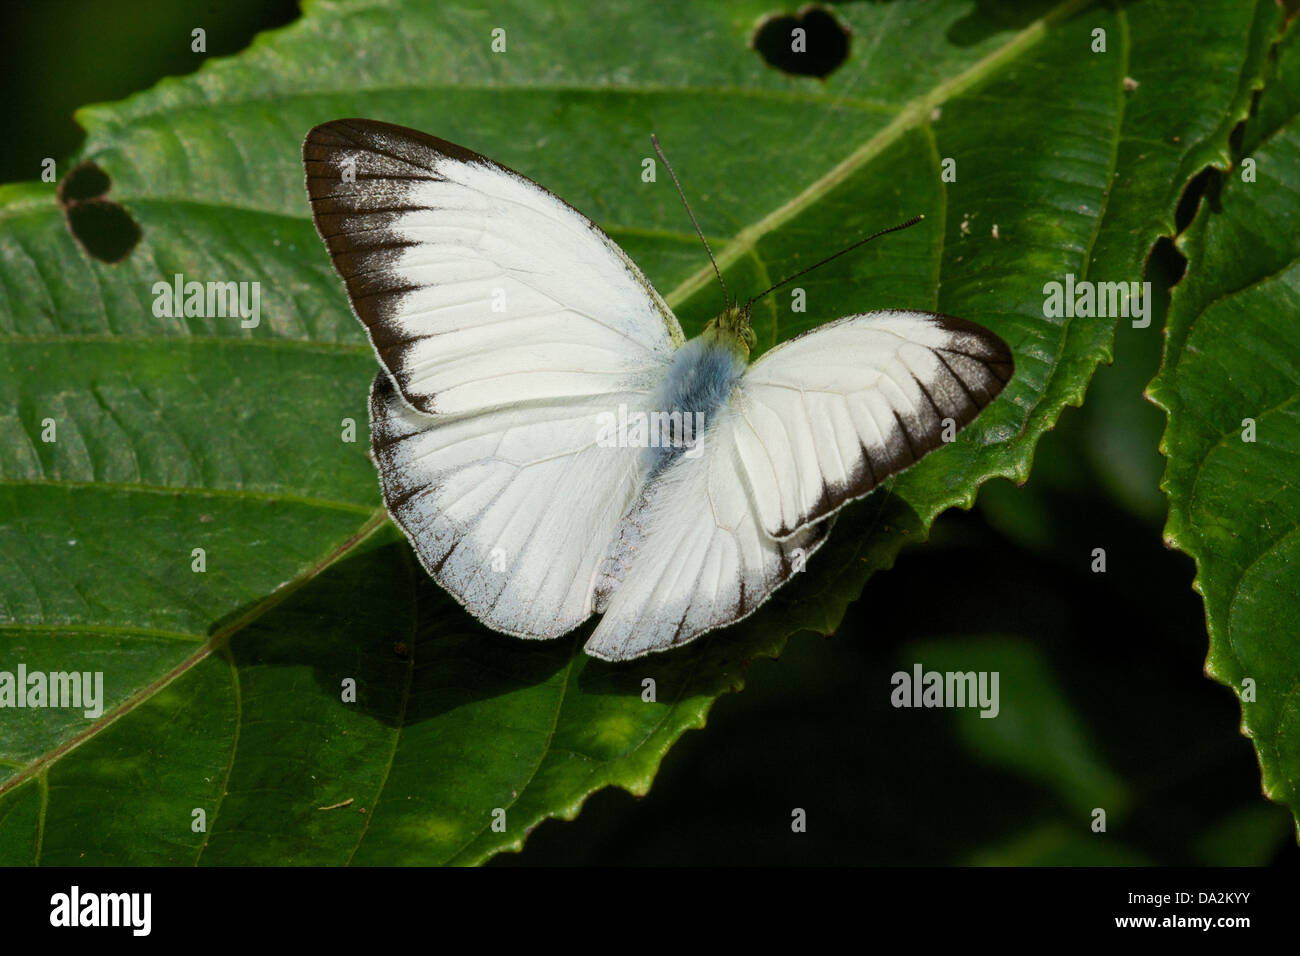 Udaiana cynis cynis, the Forest White, is a butterfly in the Pieridae family. It is found in south-east Asia. Stock Photo